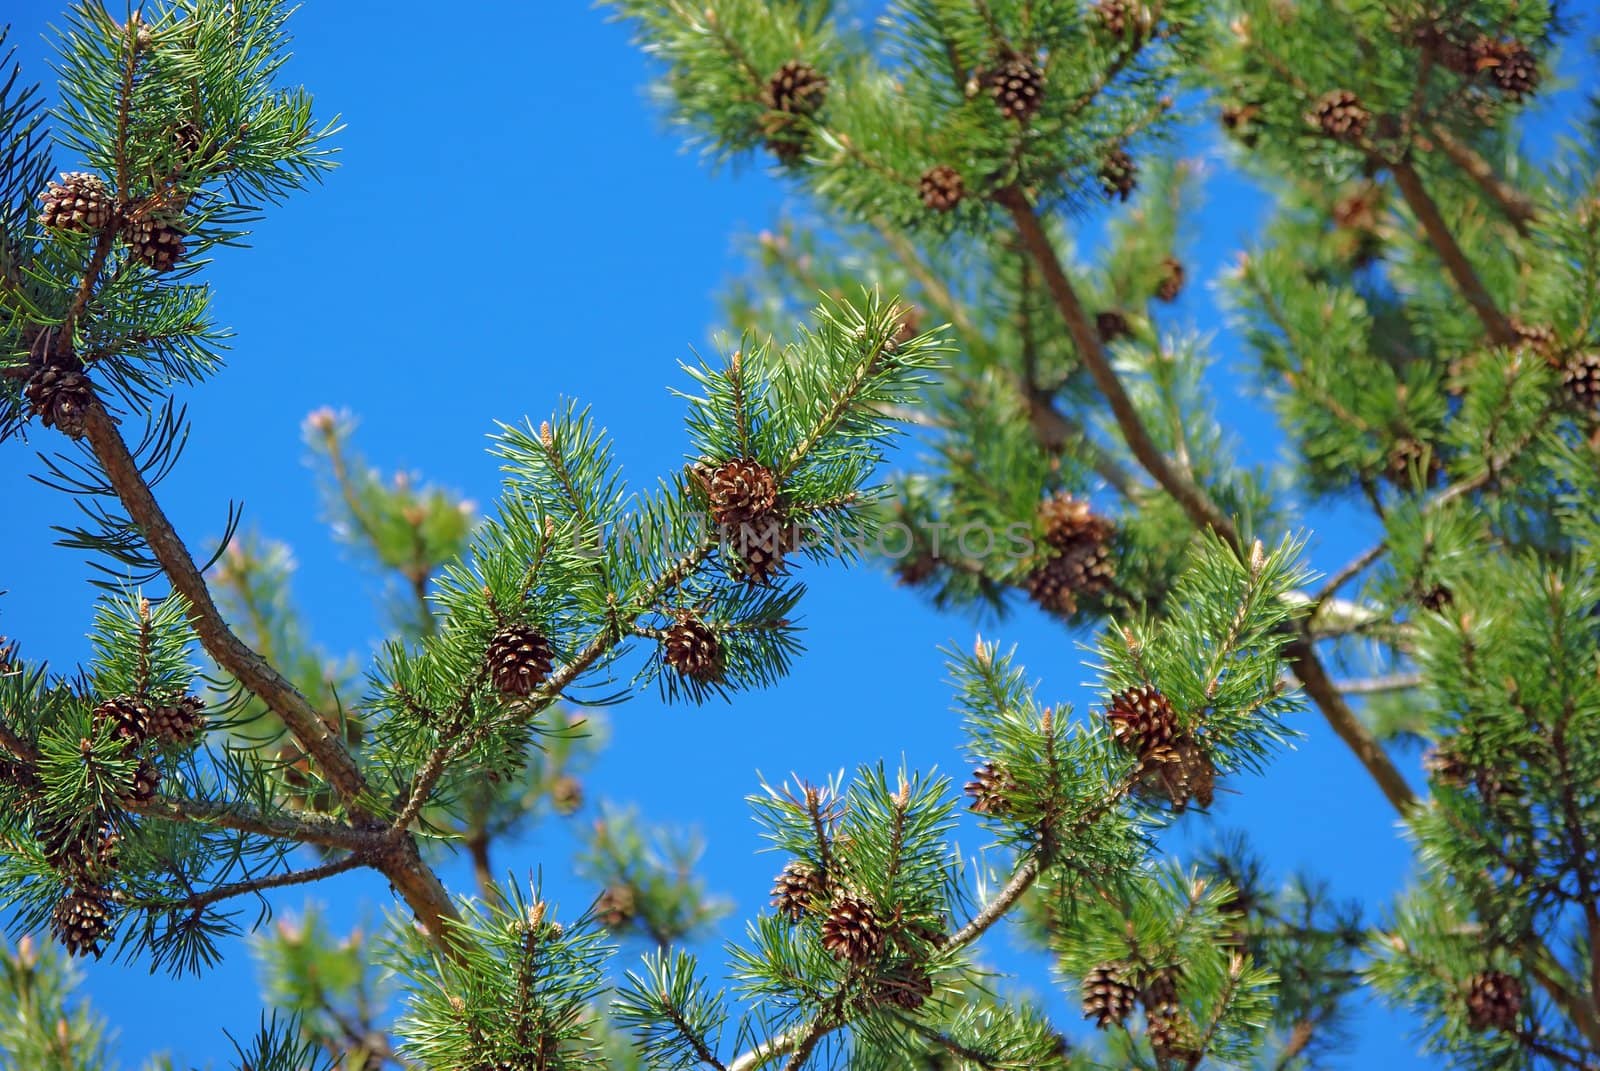 Pinetree branches with cones against blue sky by Vitamin